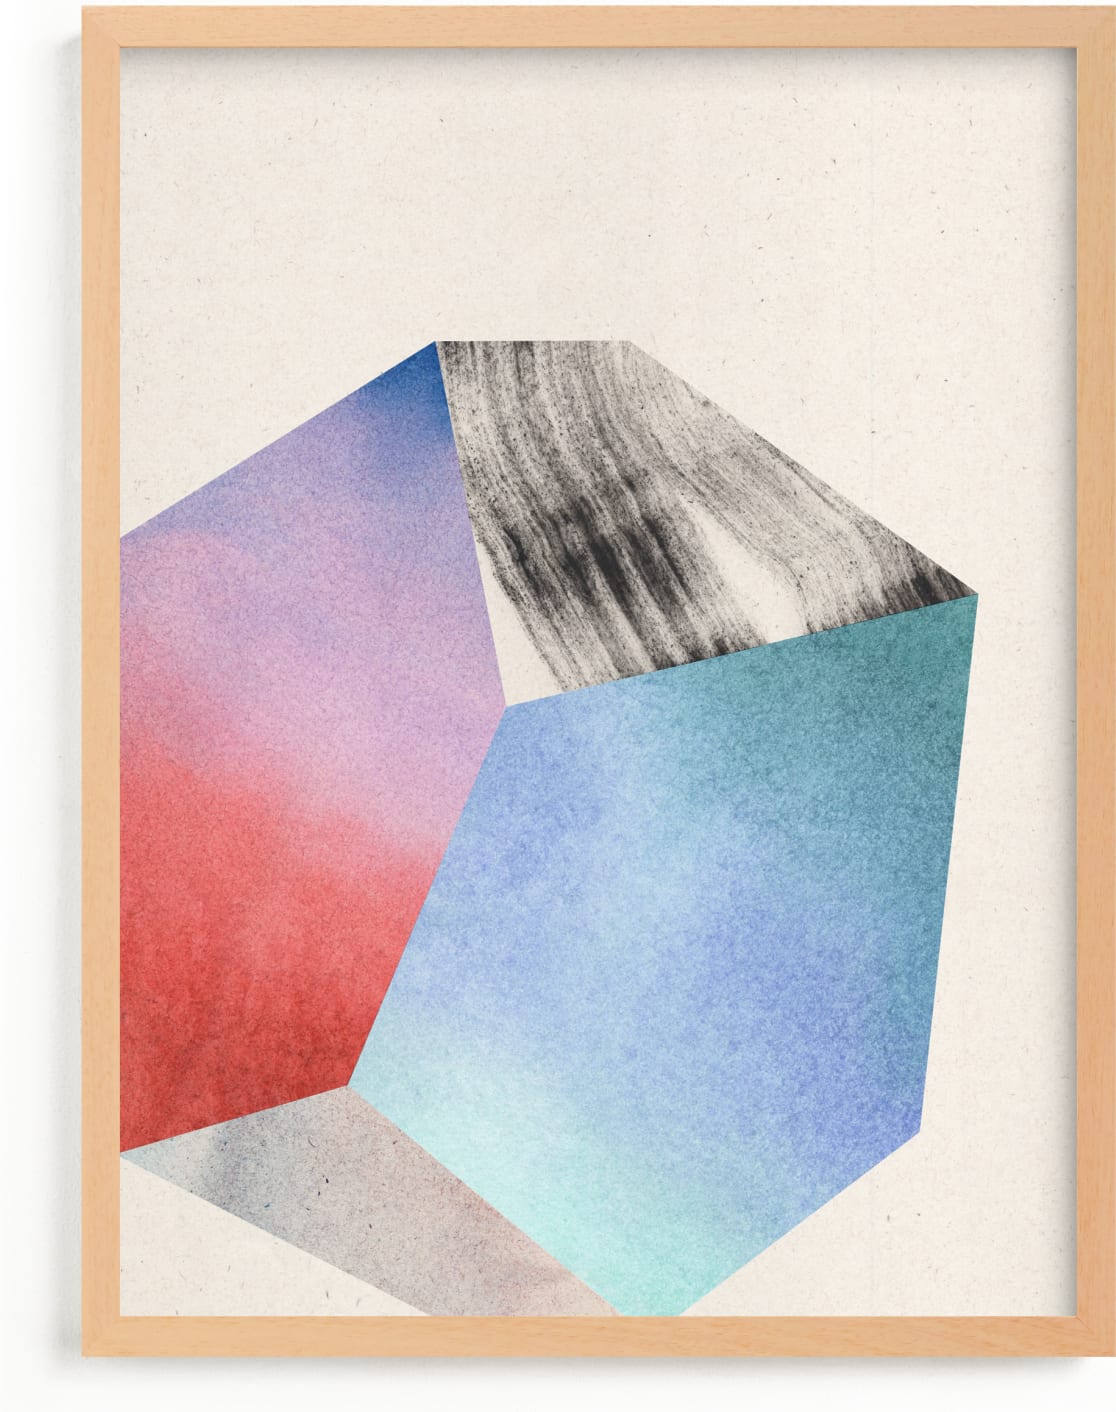 This is a colorful, beige art by Sumak Studio called Unexpected Crystals I.